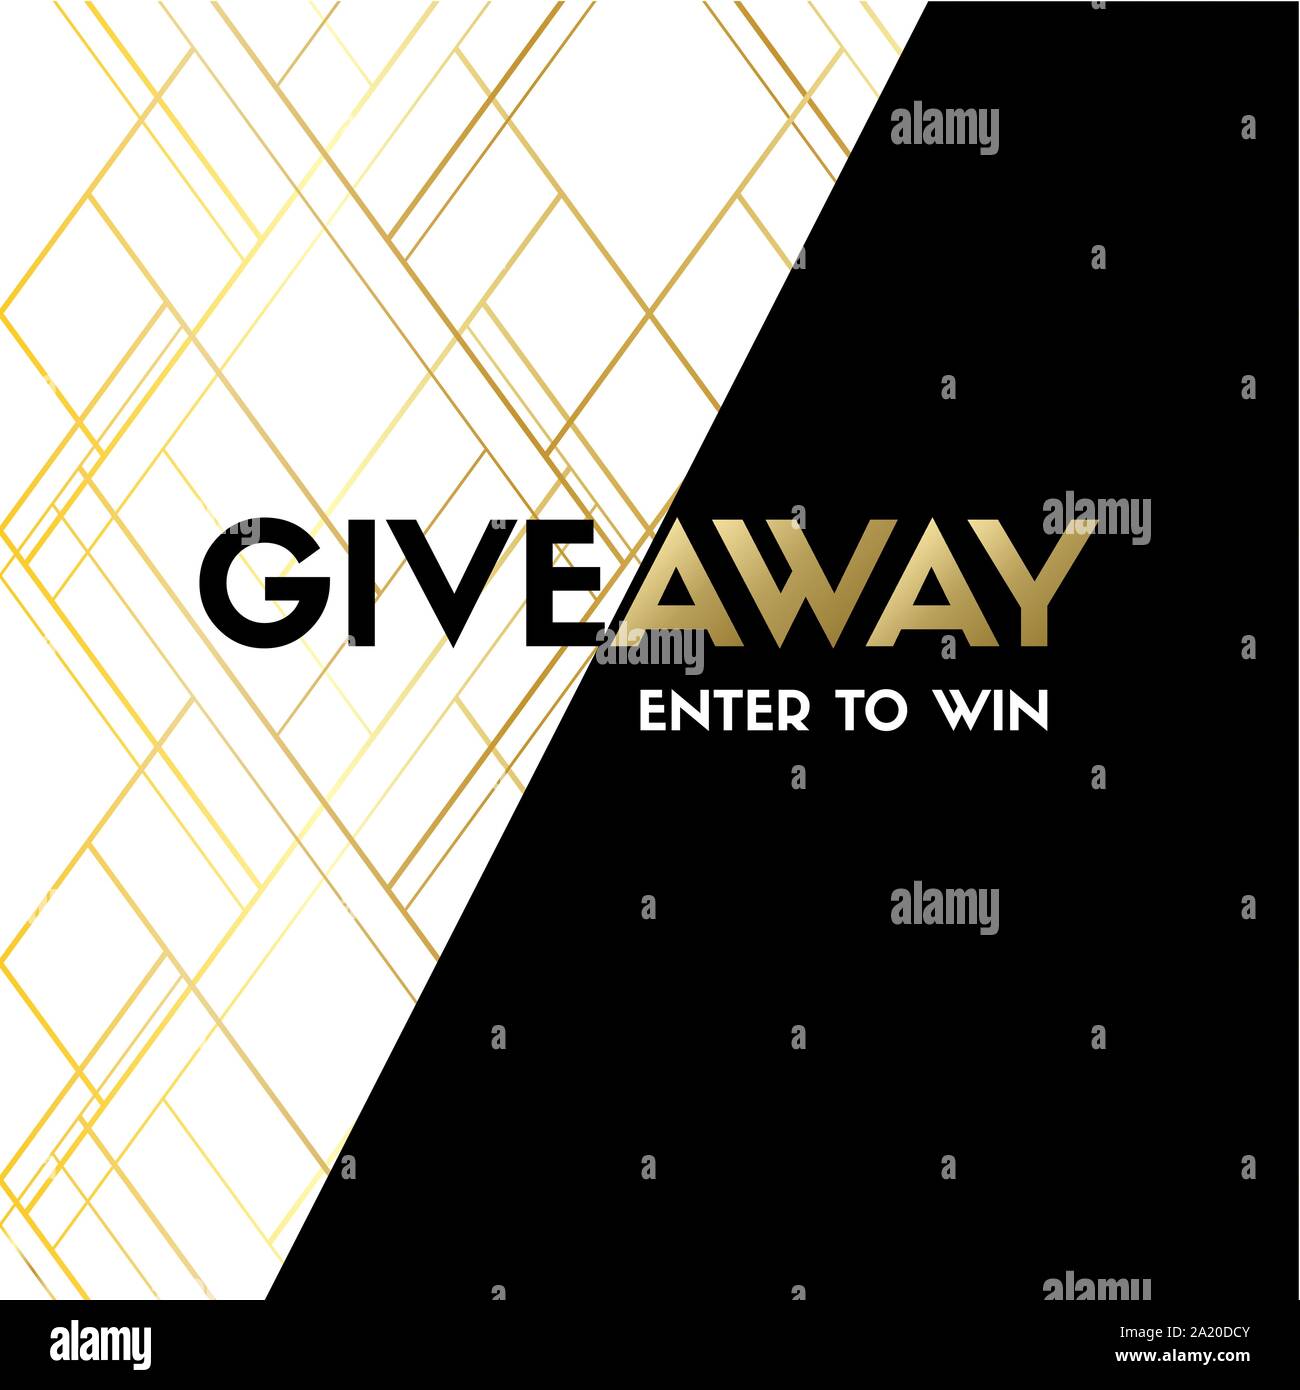 Giveaway. Enter to win. Luxury banner template Stock Vector